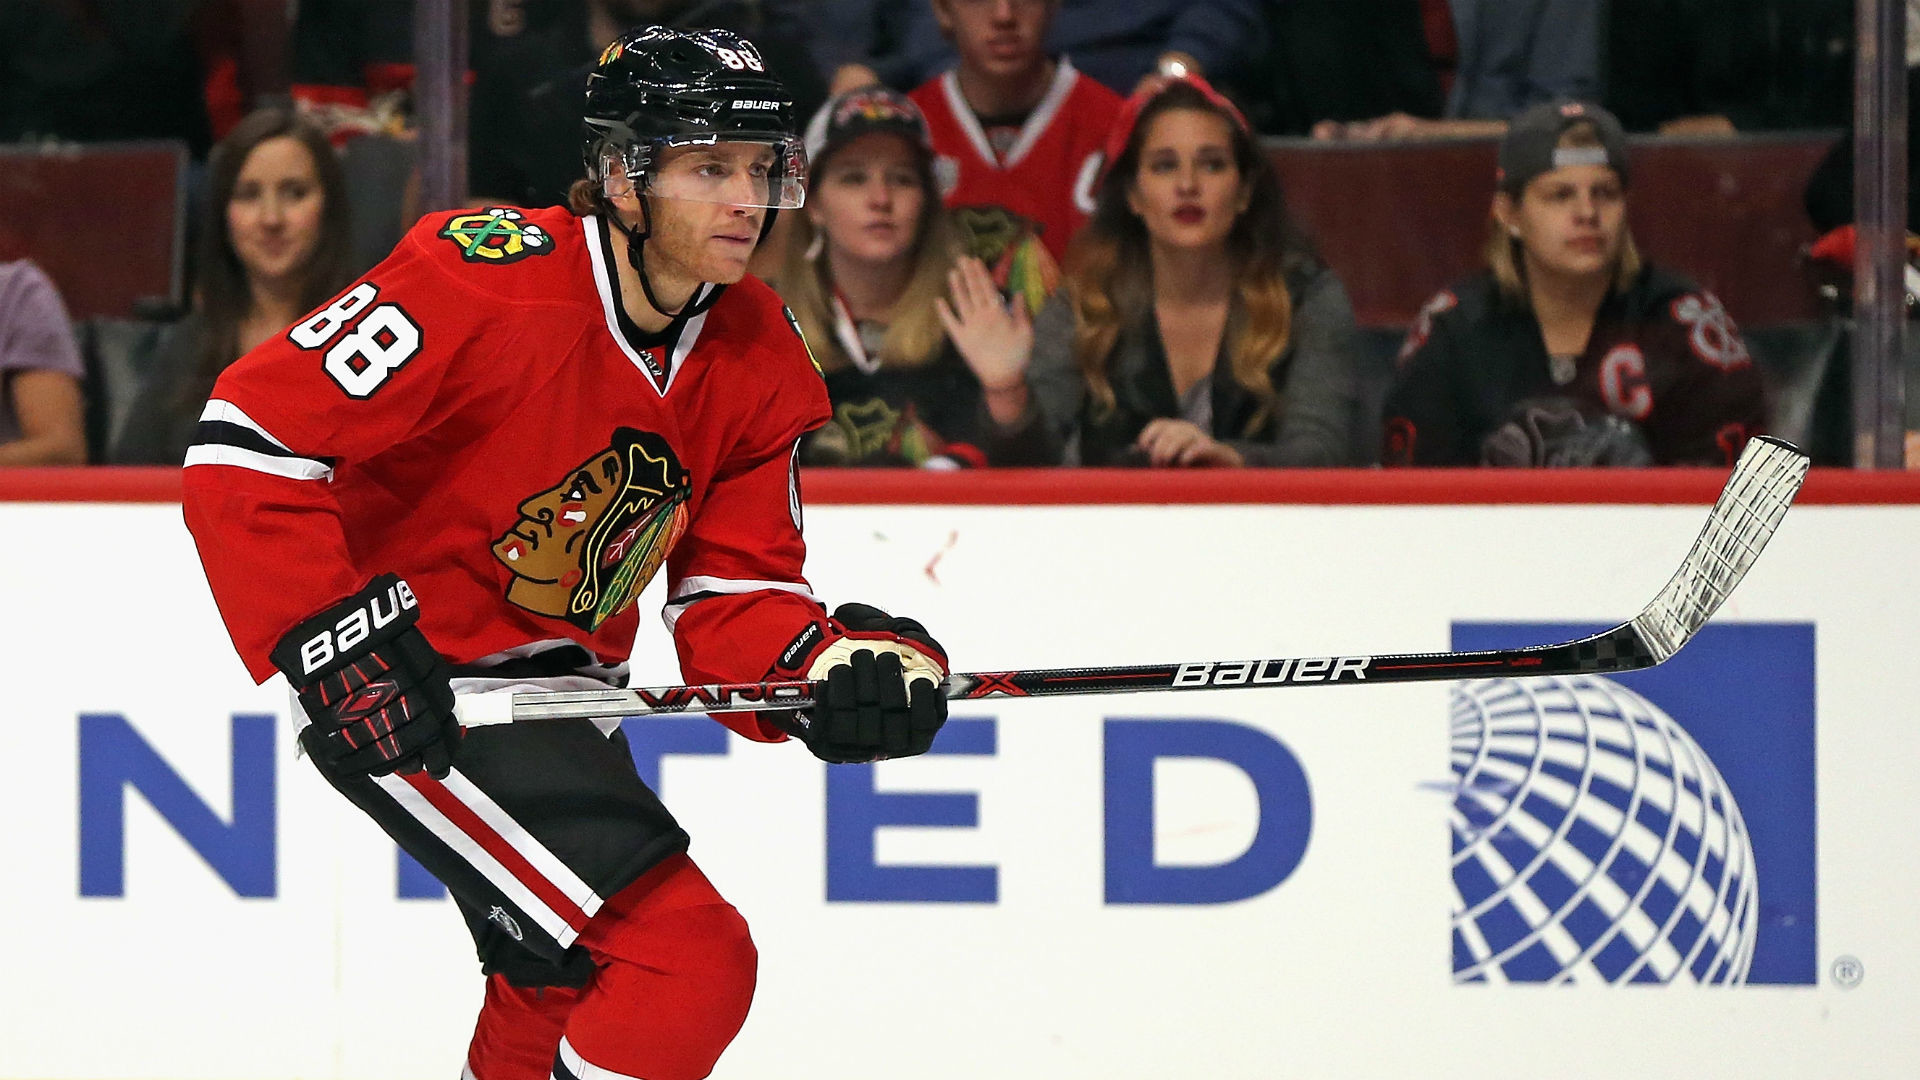 Leaked 'evidence' in Patrick Kane case was hoax, district attorney says |  NHL | Sporting News